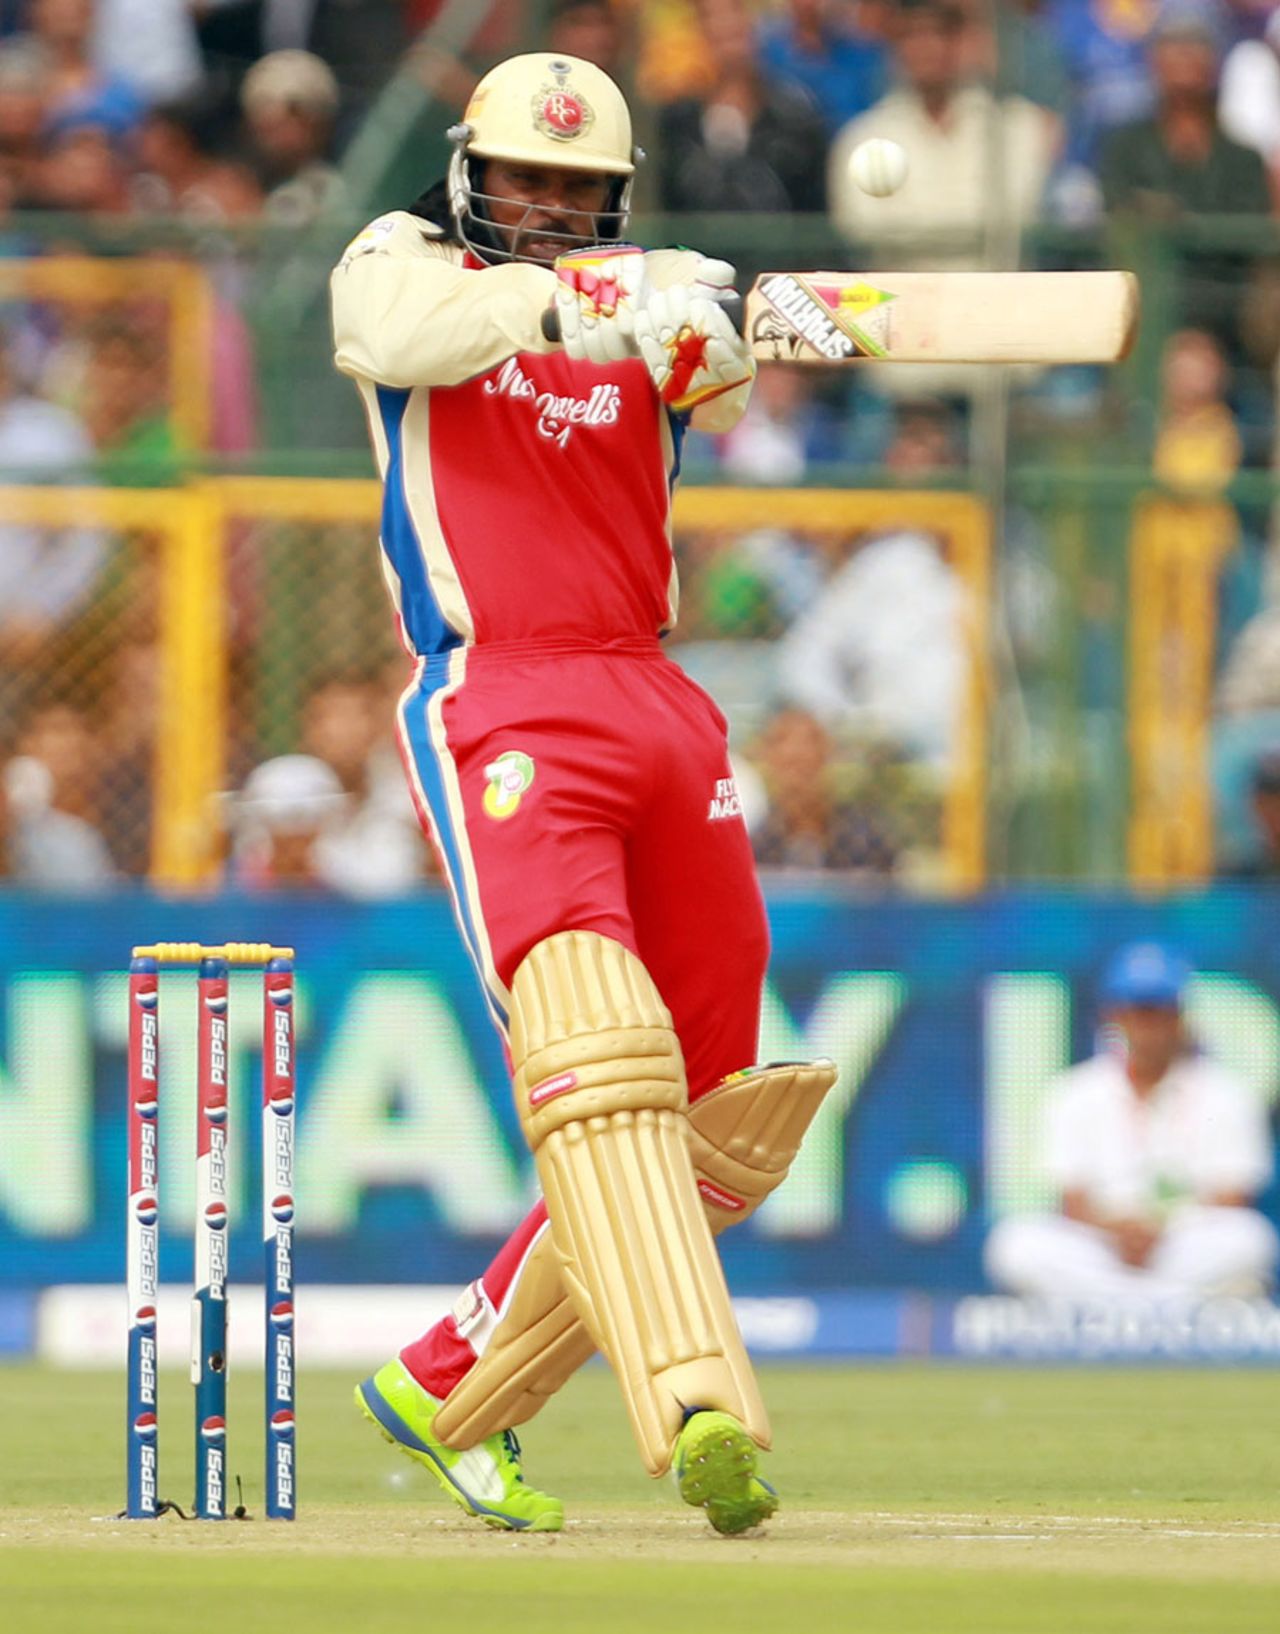 Chris Gayle top-scored for Royal Challengers with 34, Rajasthan Royals v Royal Challengers Bangalore, IPL 2013, Jaipur, April 29, 2013